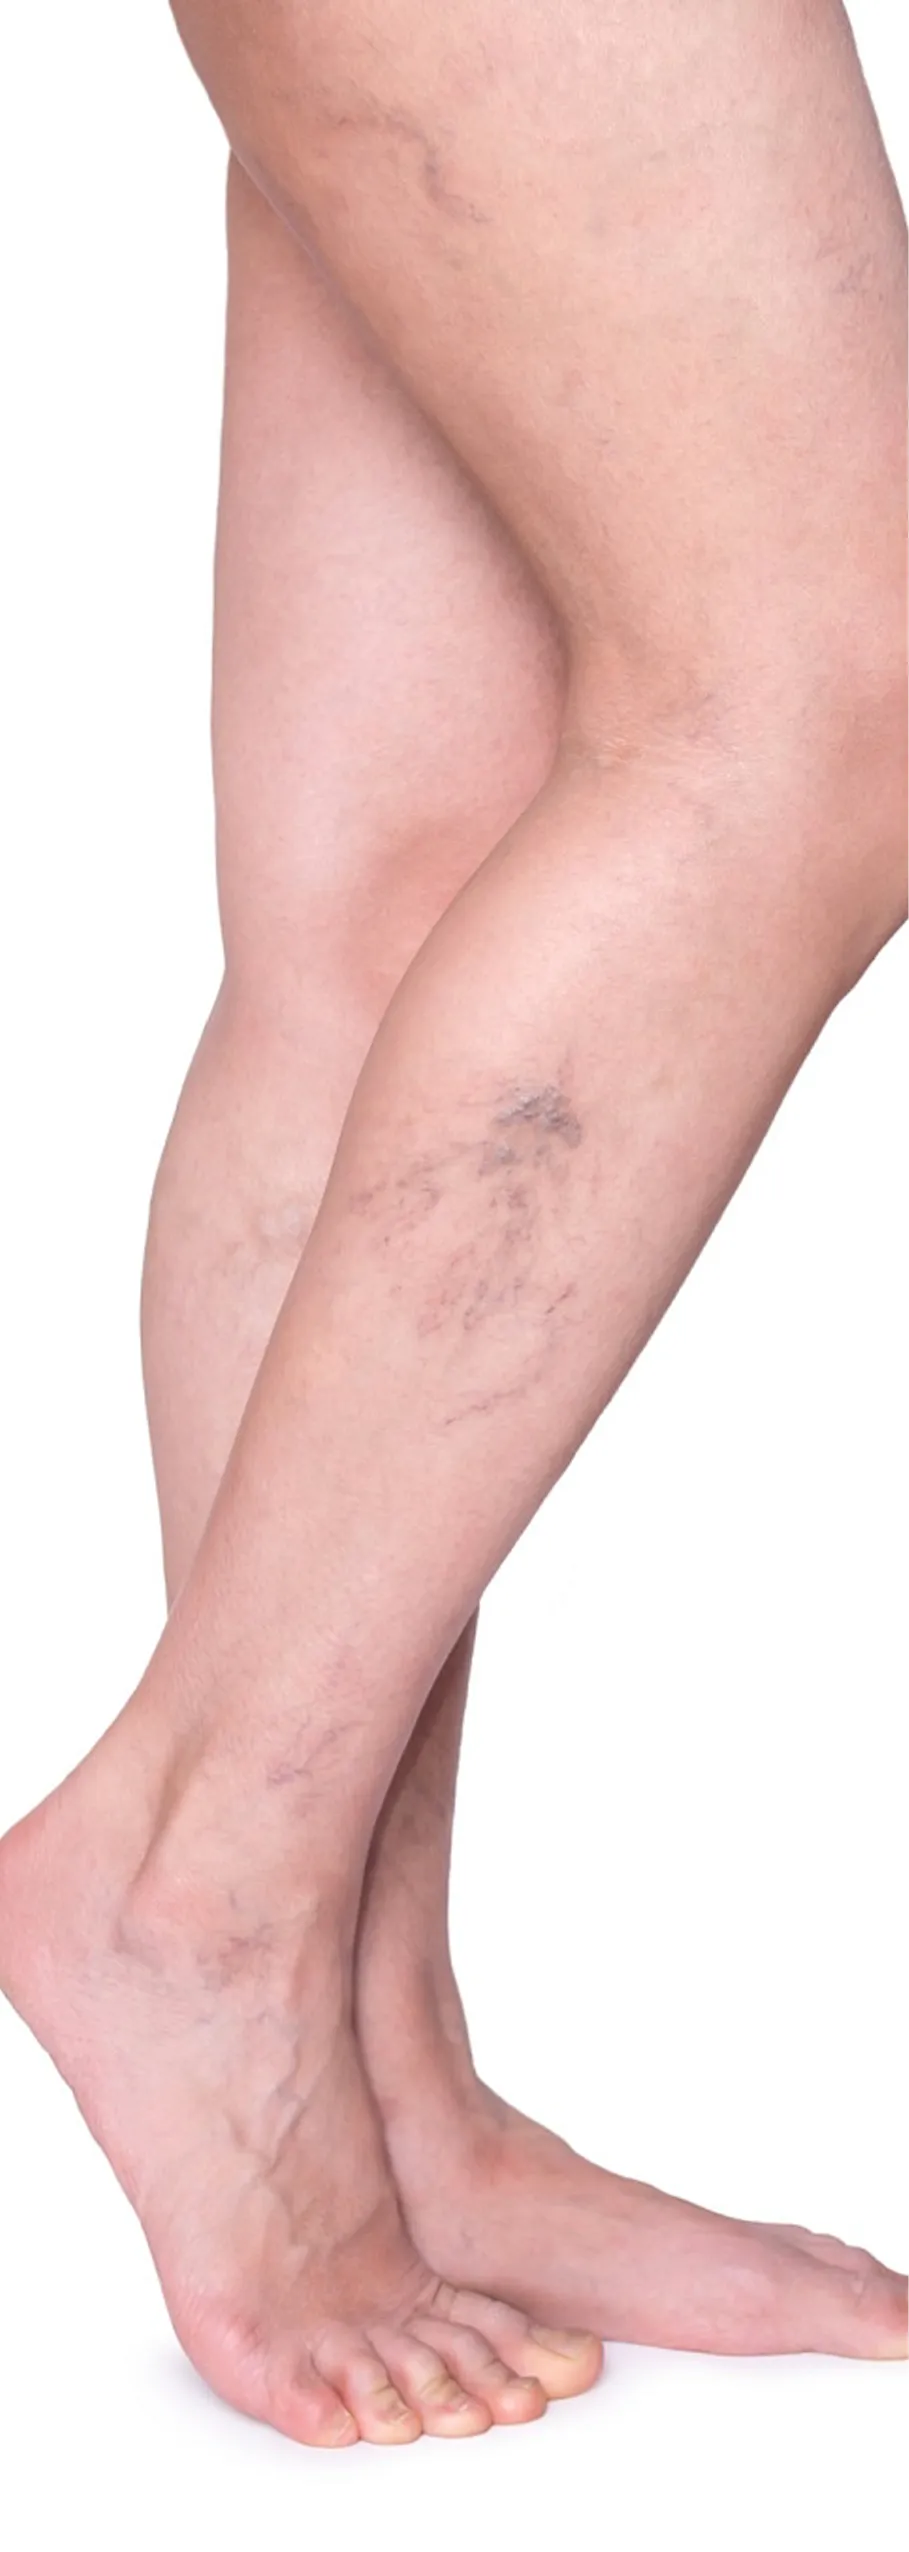 Thread Vein Removal Solutions